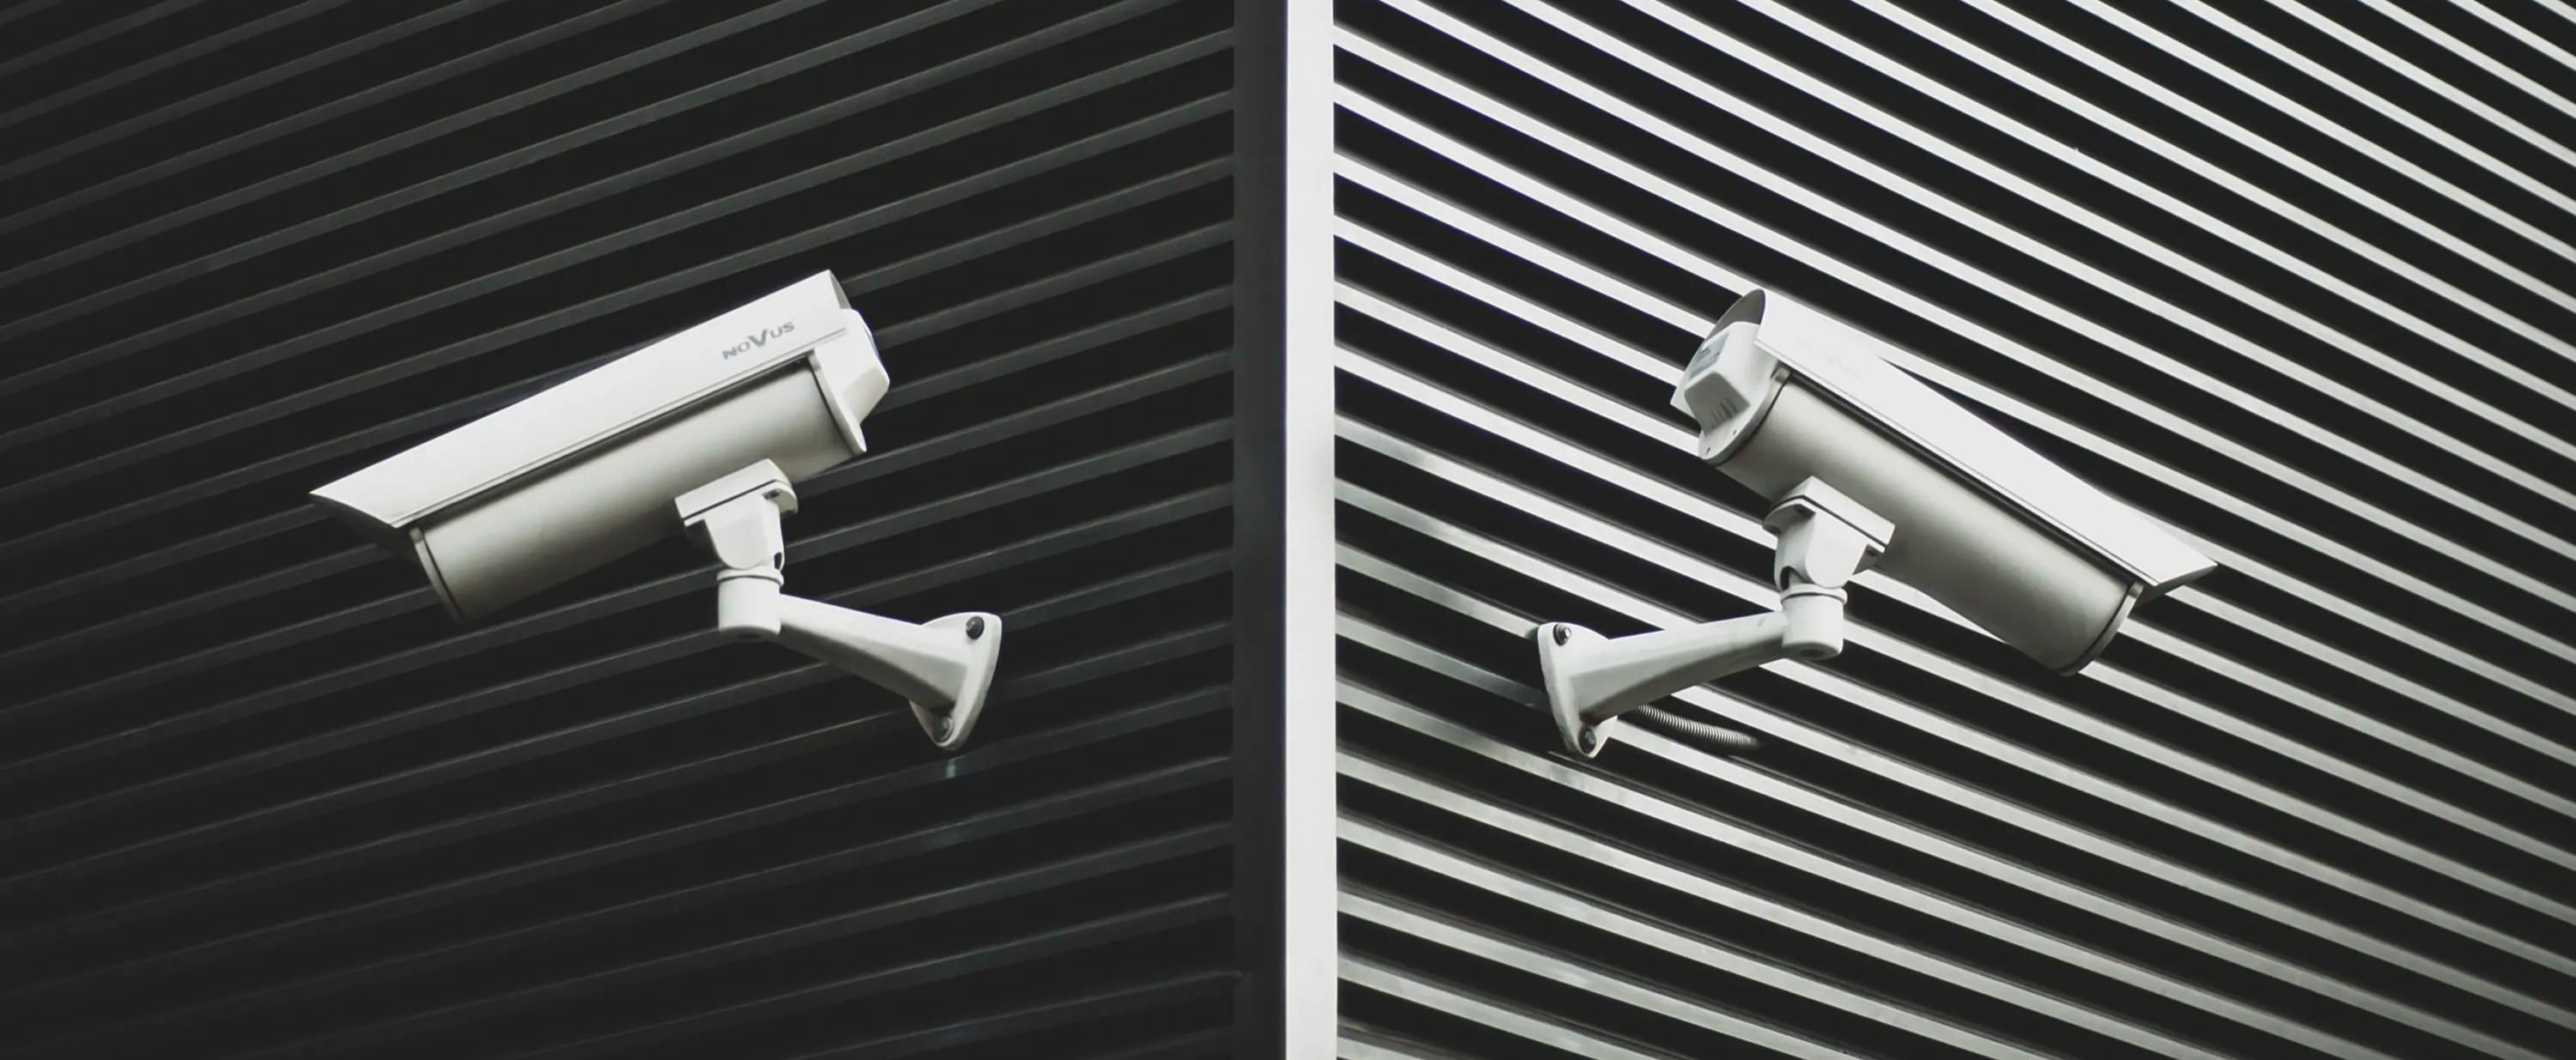 Can security systems reduce my insurance costs?